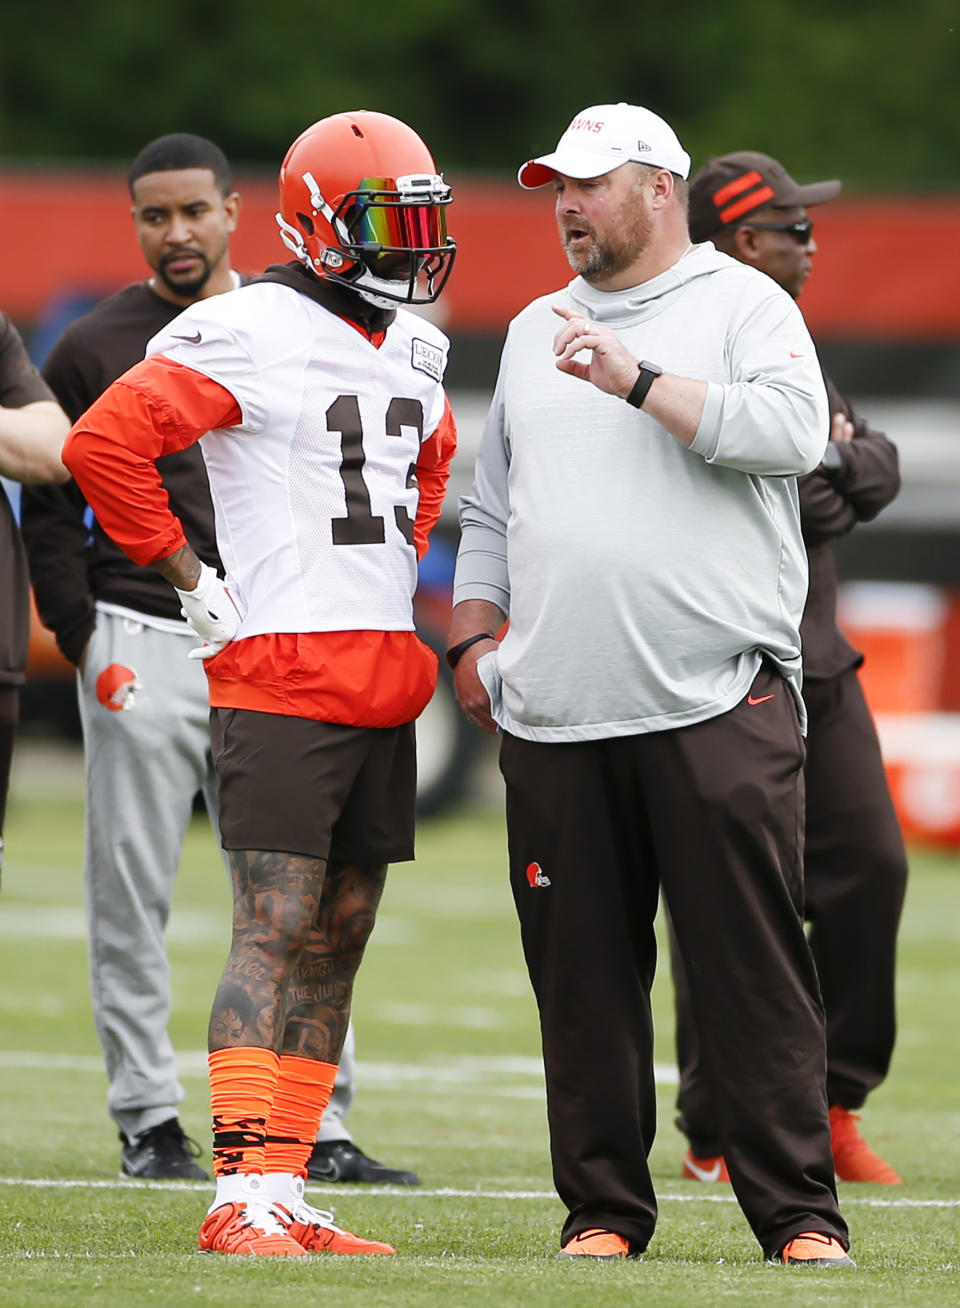 Cleveland Browns wide receiver Odell Beckham Jr. (13) talks with head coach Freddie Kitchens at the team's NFL football training facility in Berea, Ohio, Tuesday, June 4, 2019. (AP Photo/Ron Schwane)